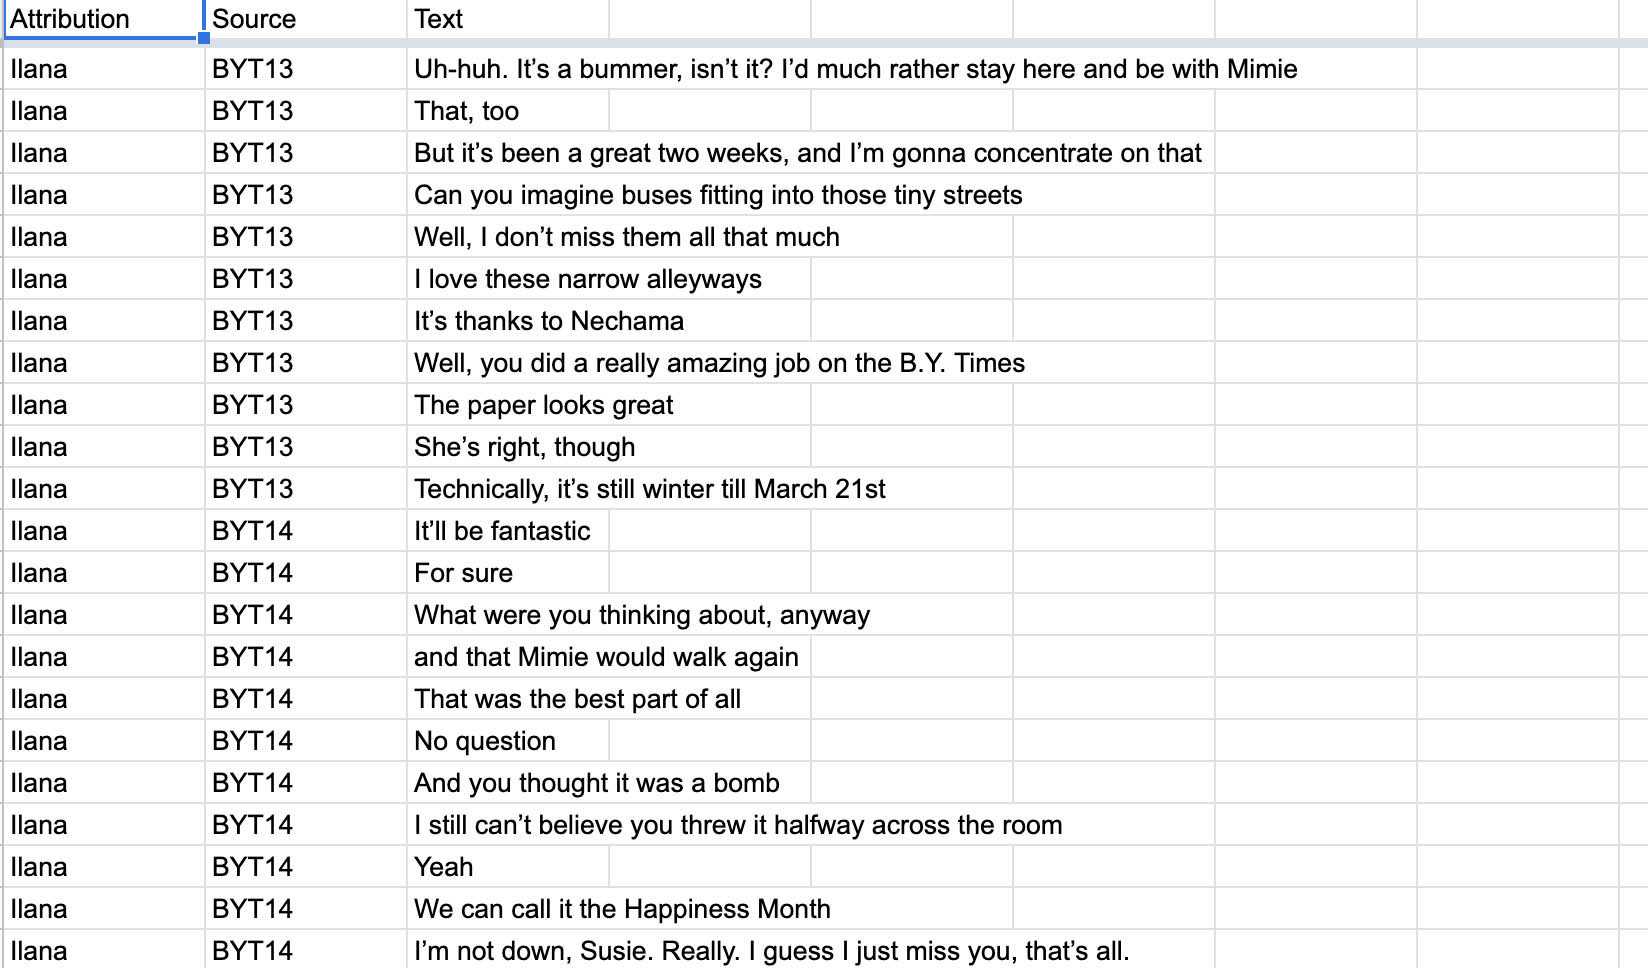 Spreadsheet of Ilana quotes without any valley girl speak